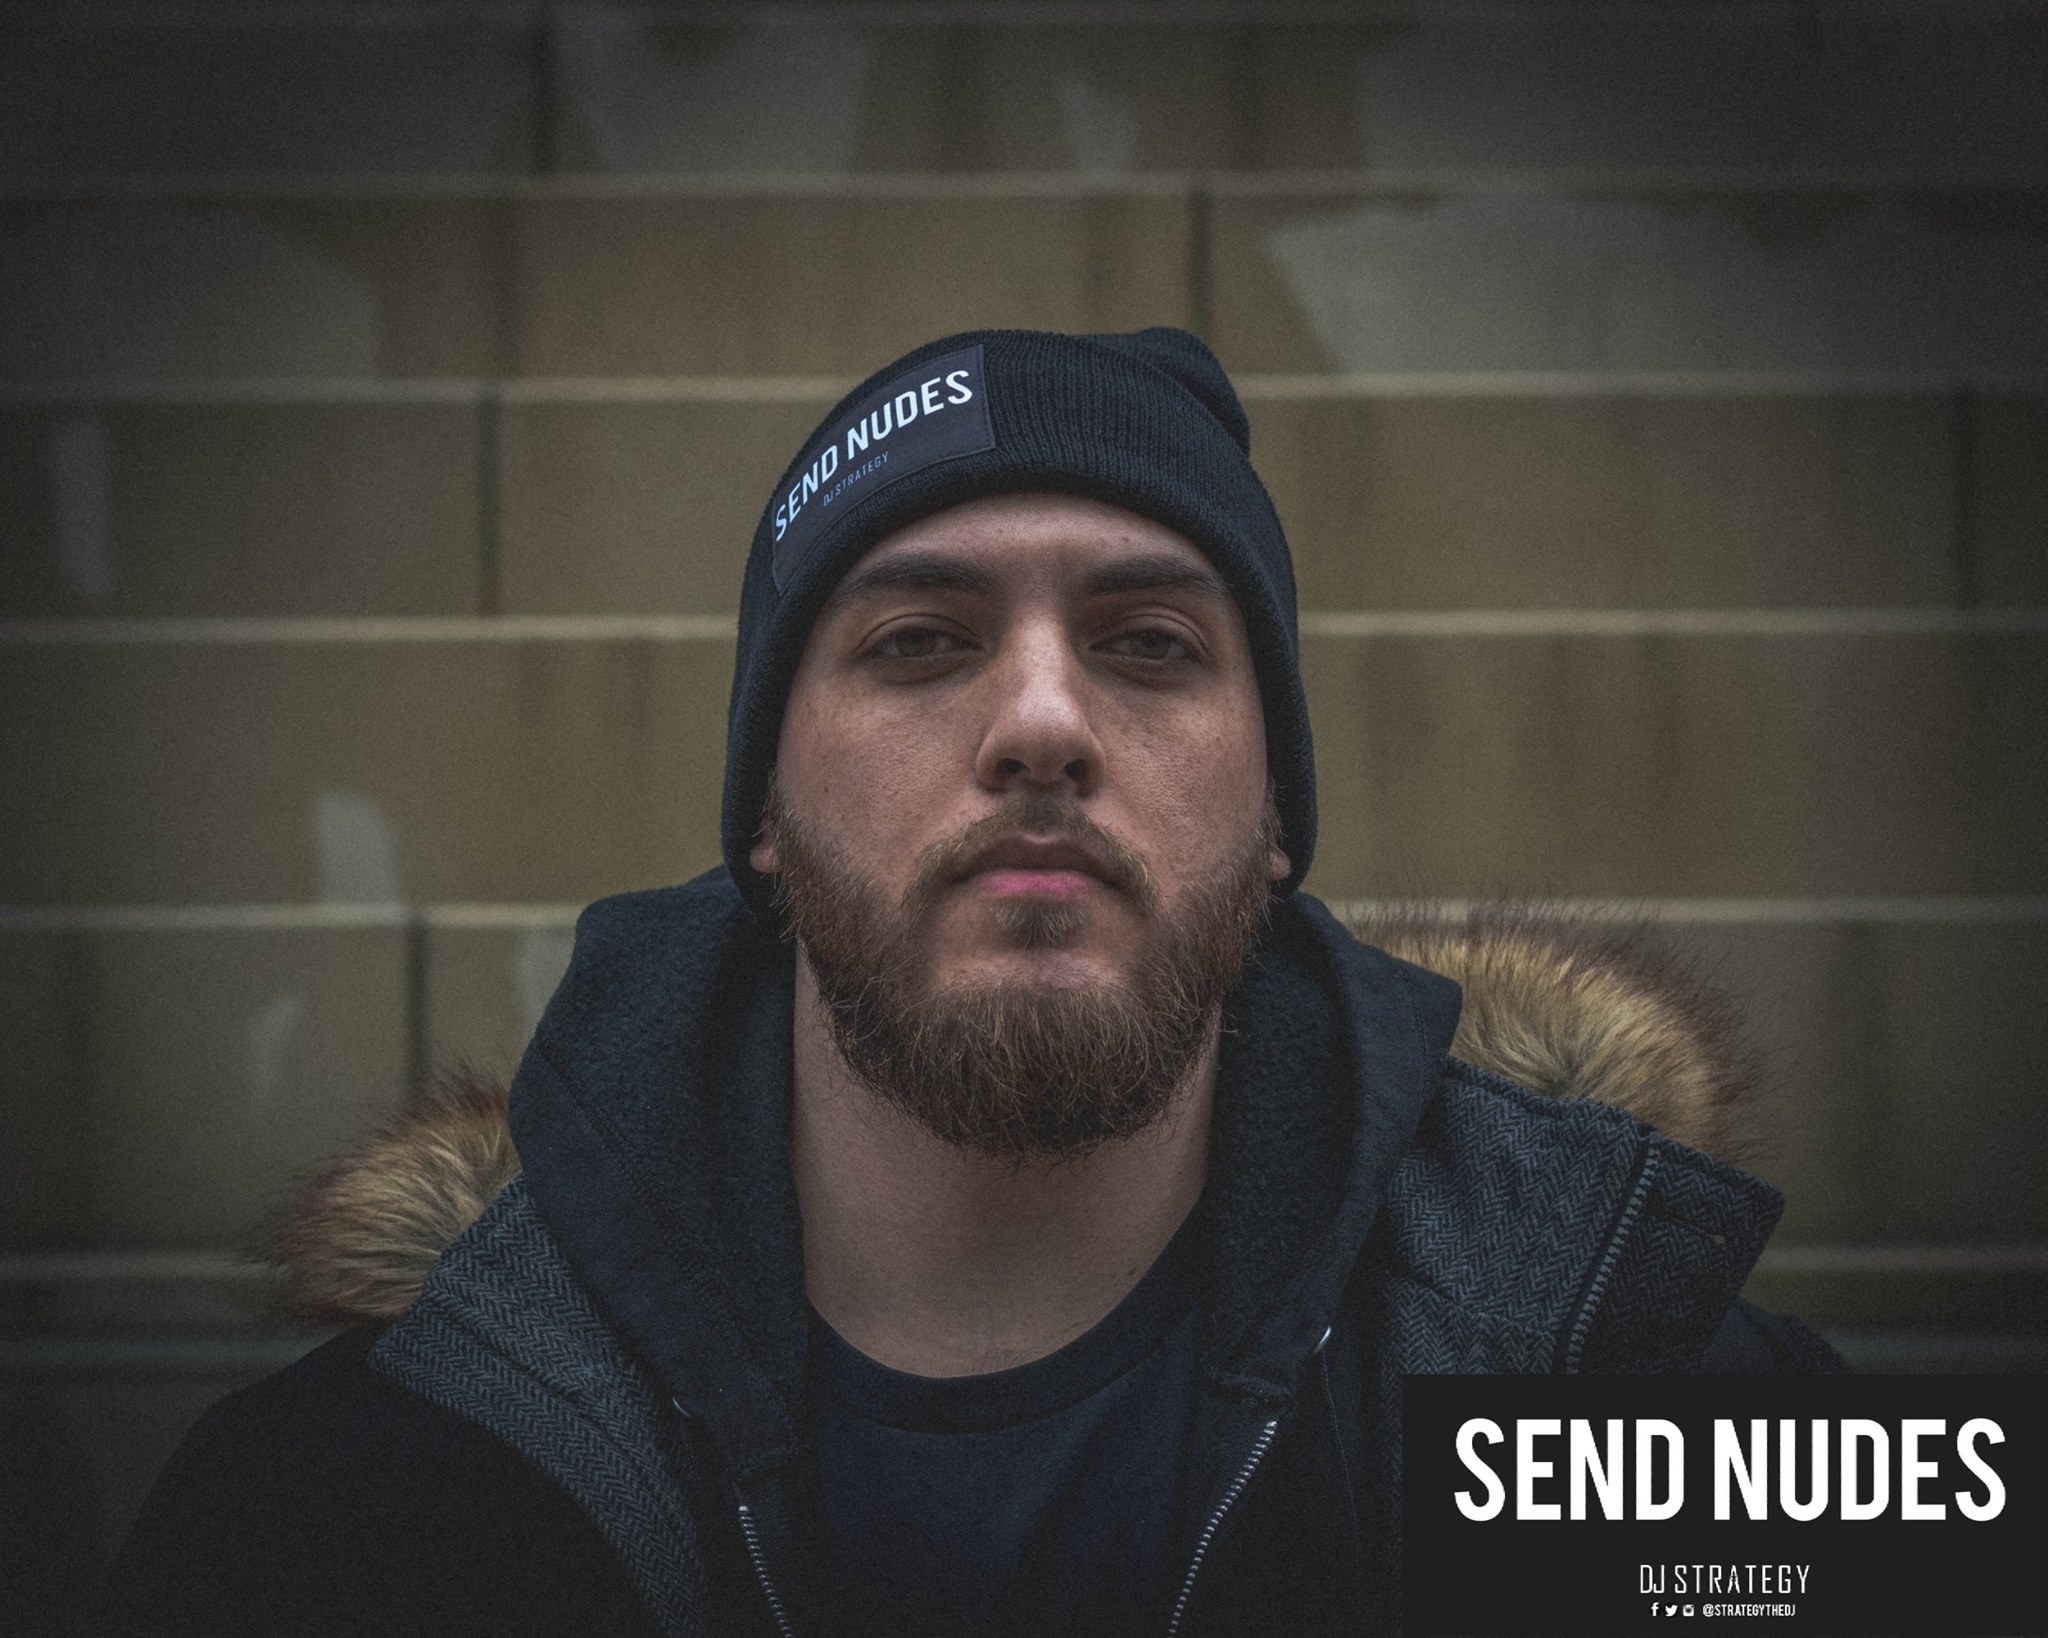 [GOODSEX TIPS] Dj Strategy Drops Exclusive 6K Mix, Also Asks to “Send Nudes”